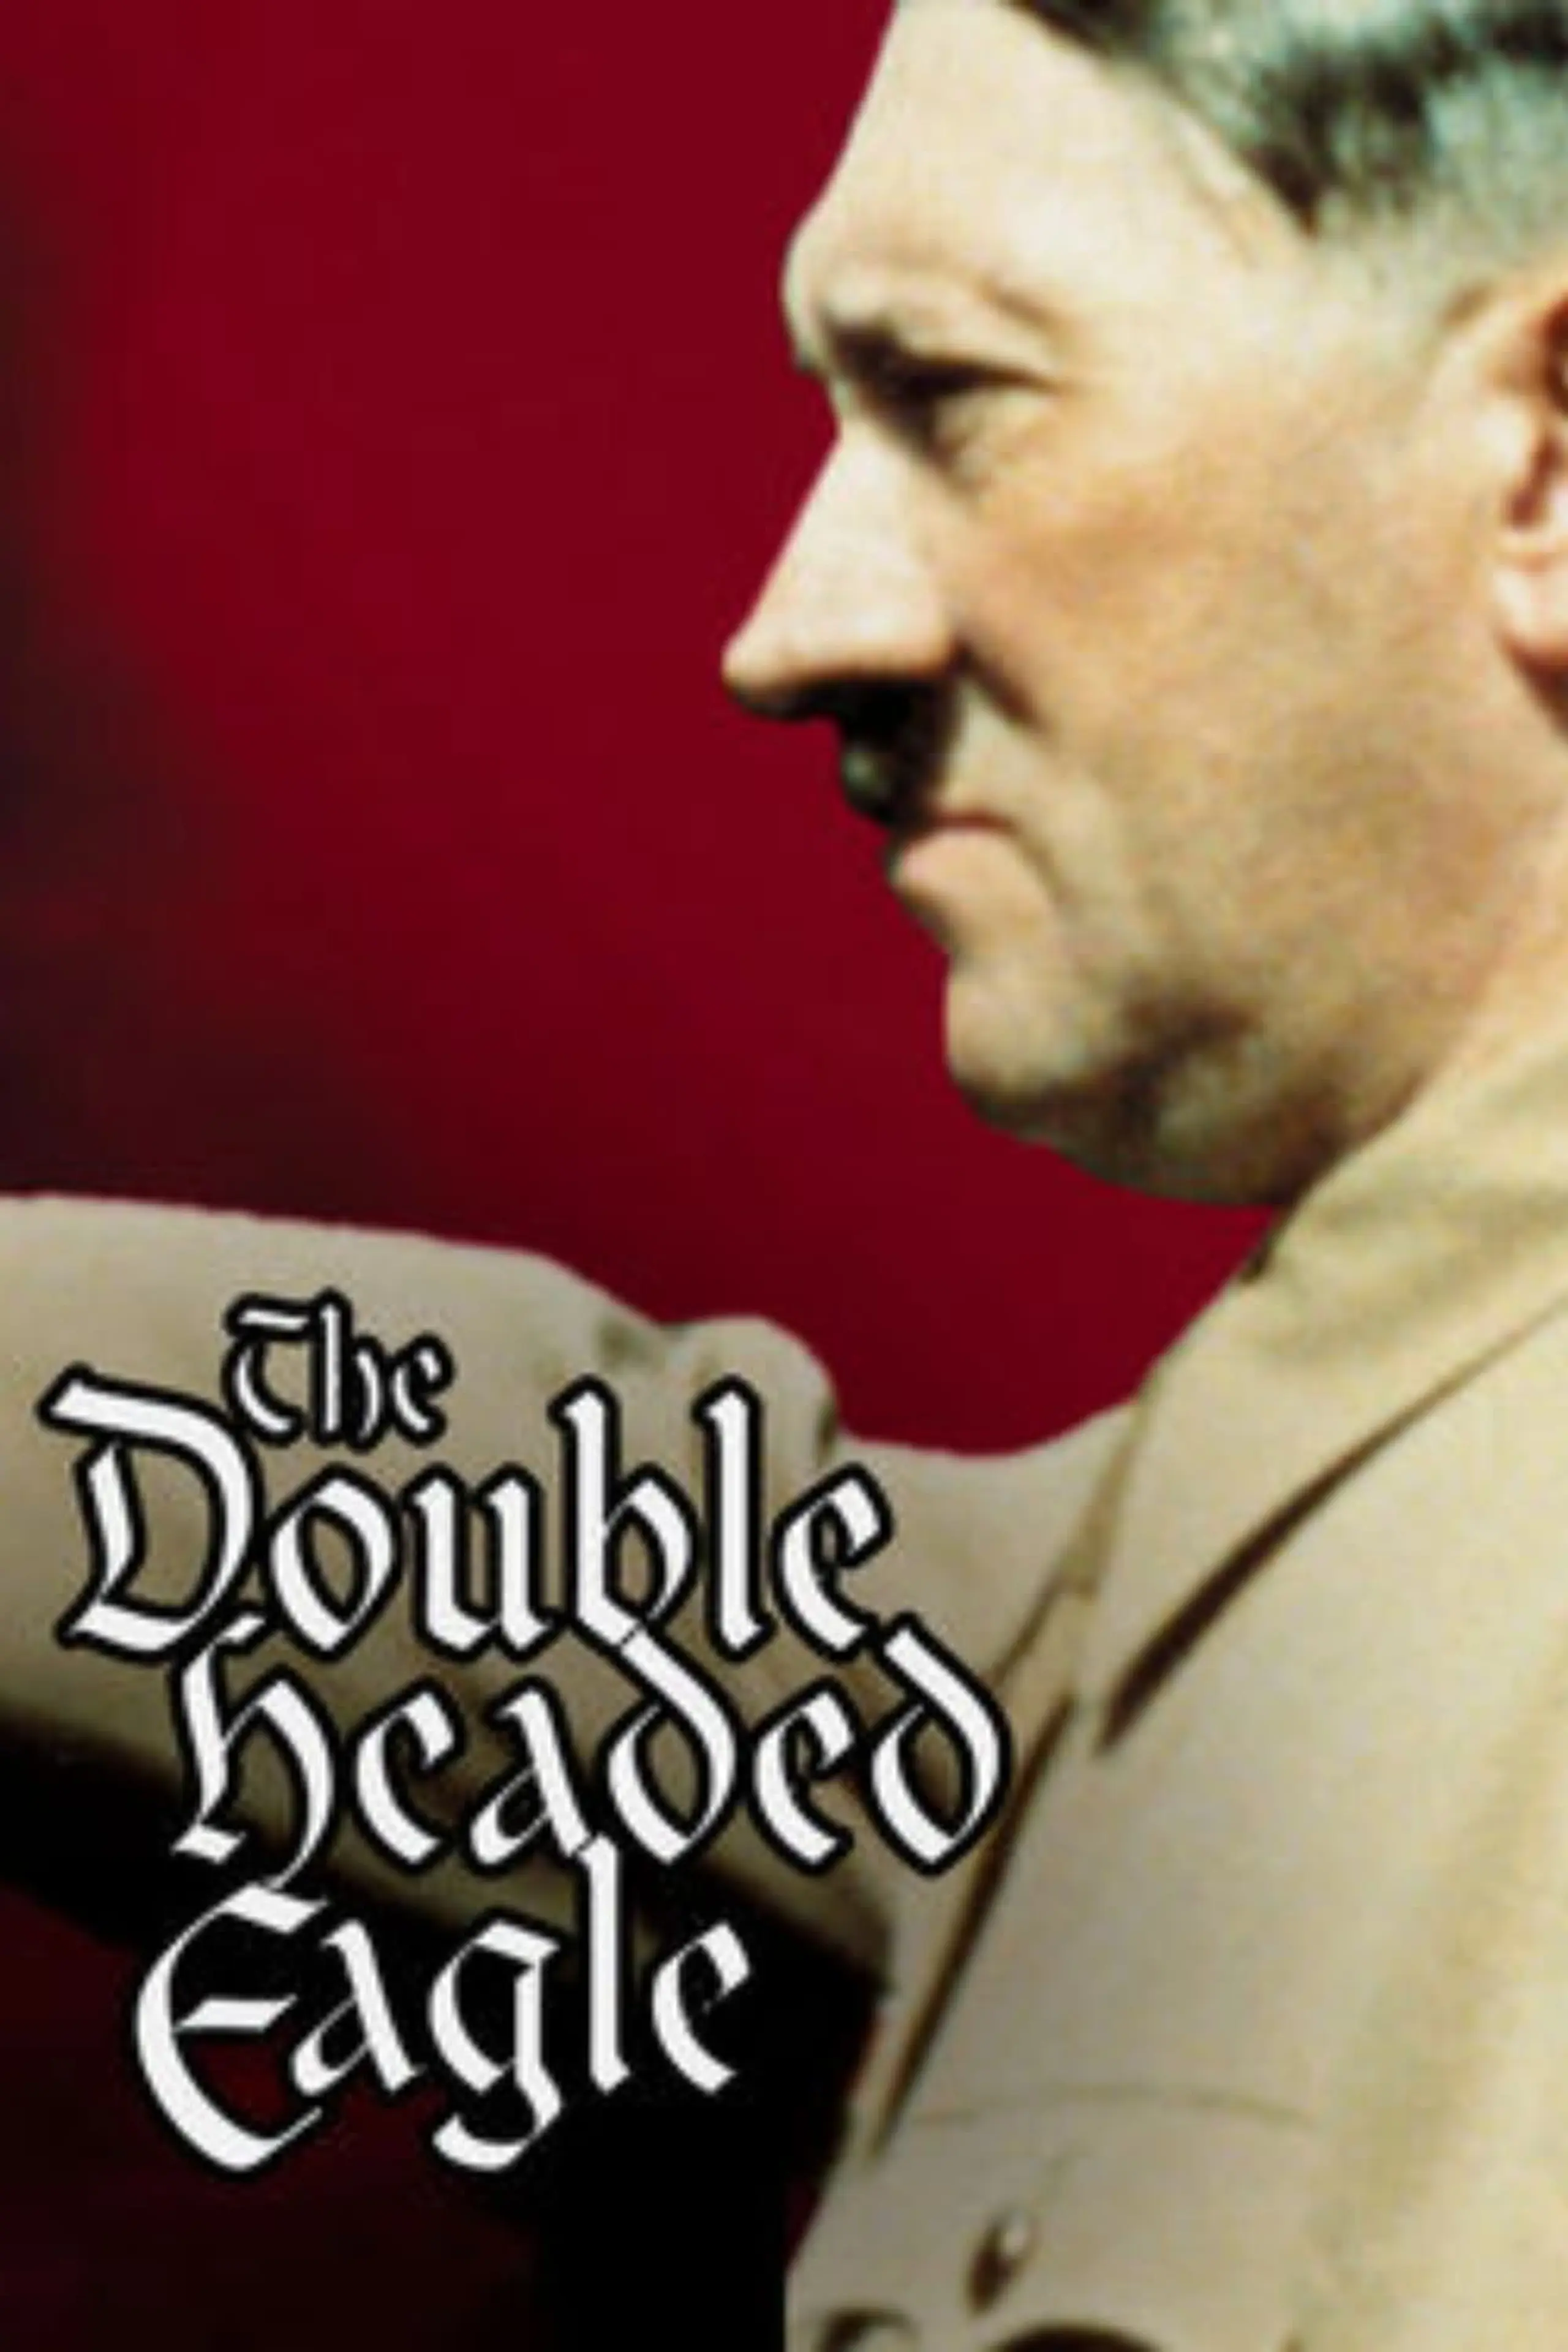 Double Headed Eagle: Hitler's Rise to Power 1918-1933